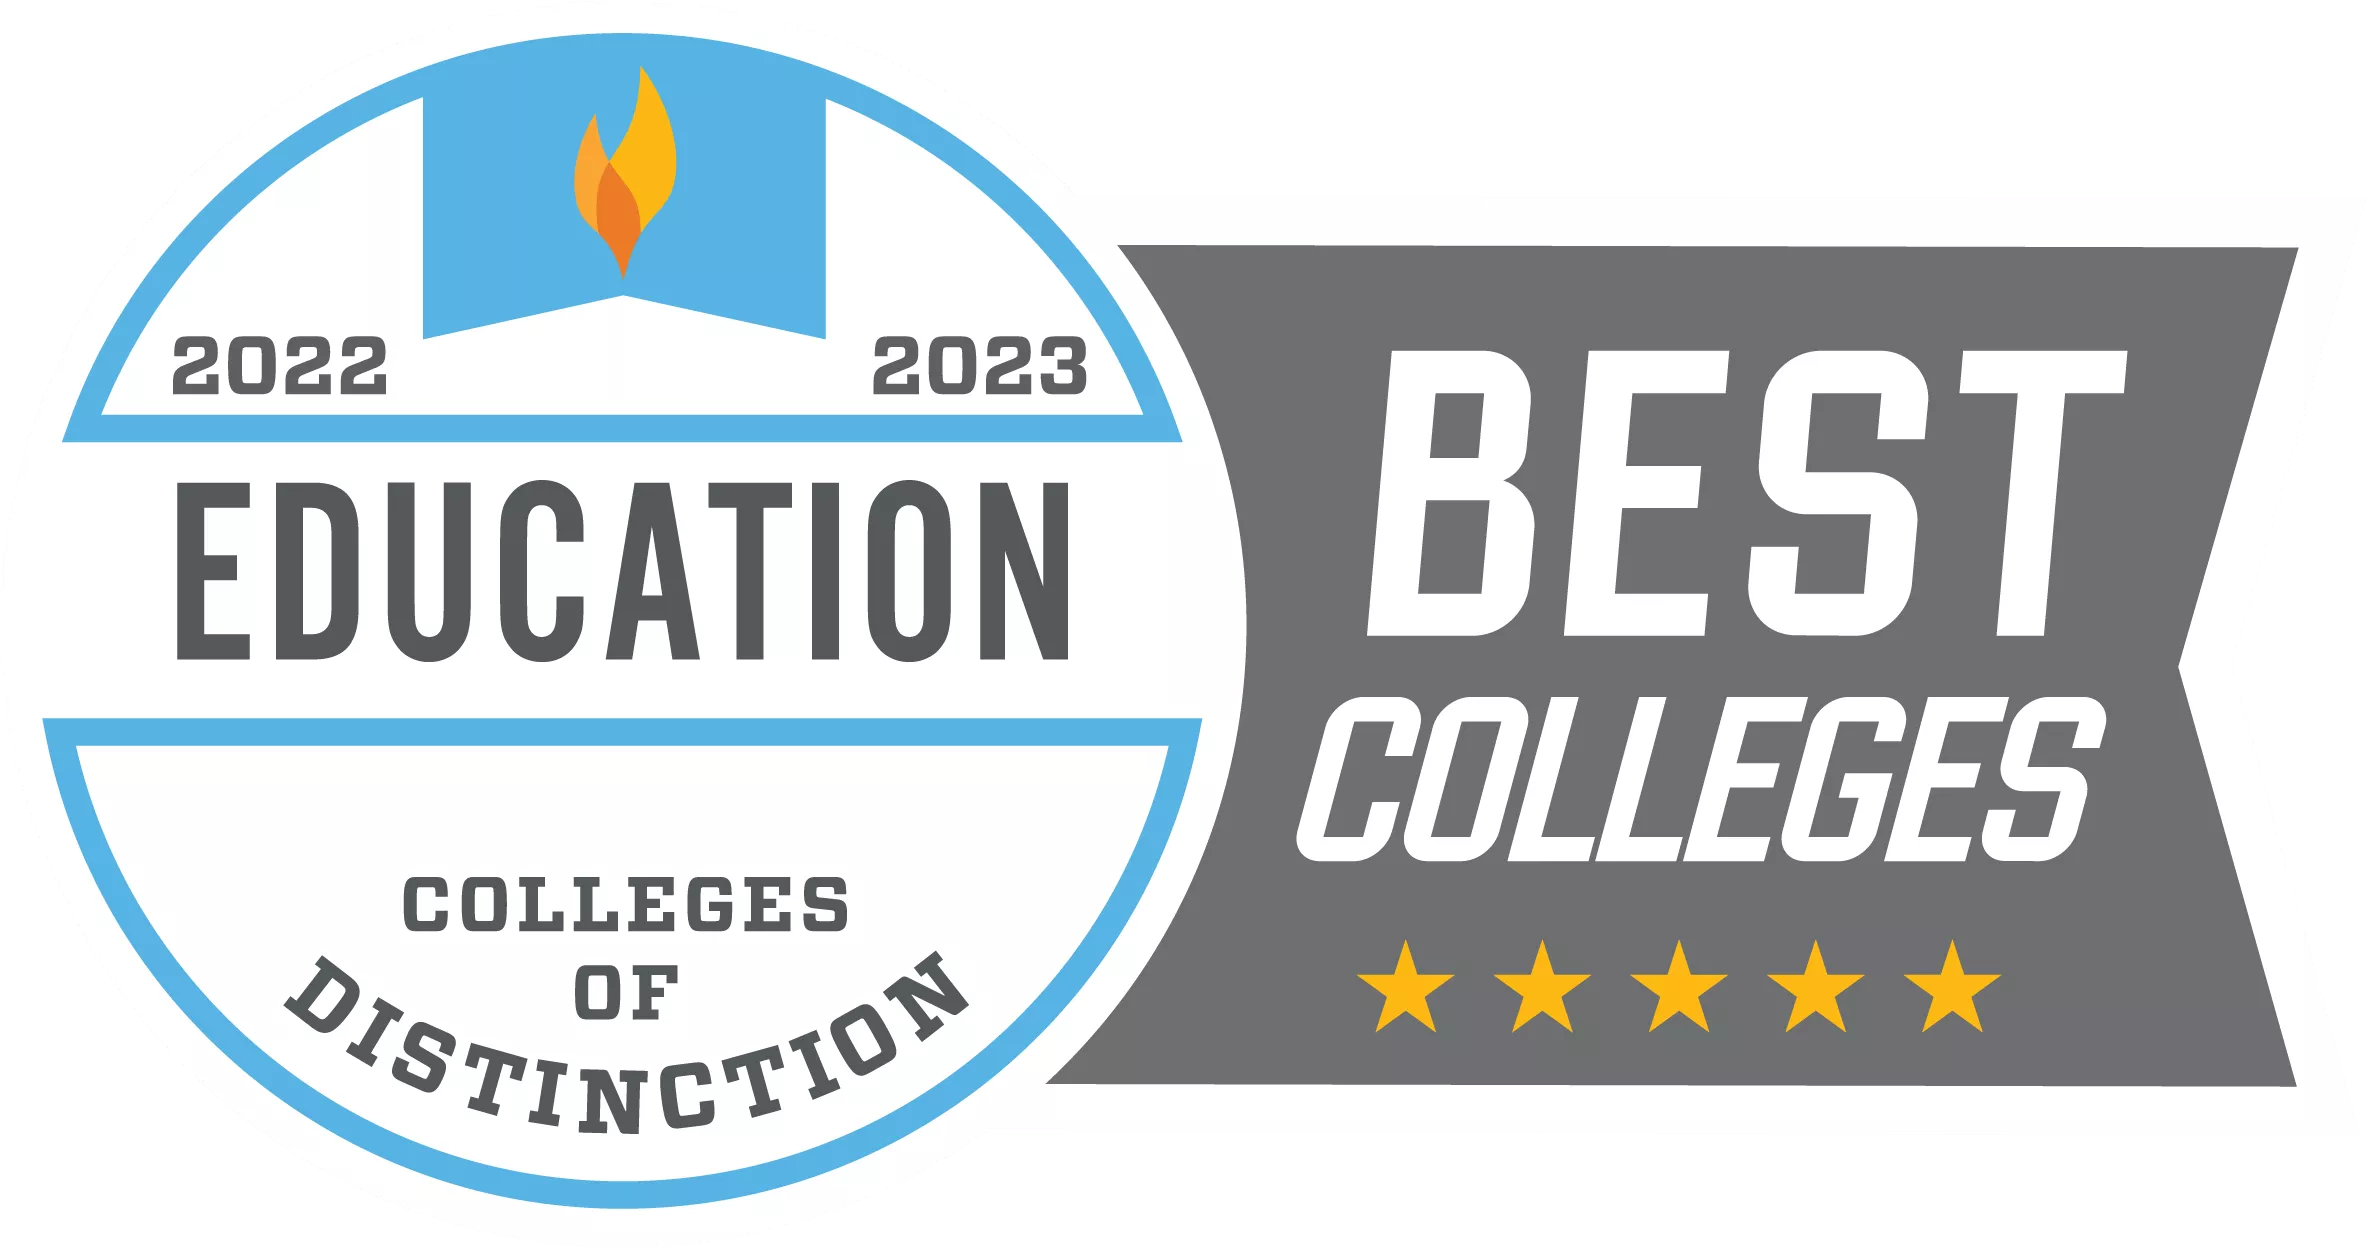 Best College in Education